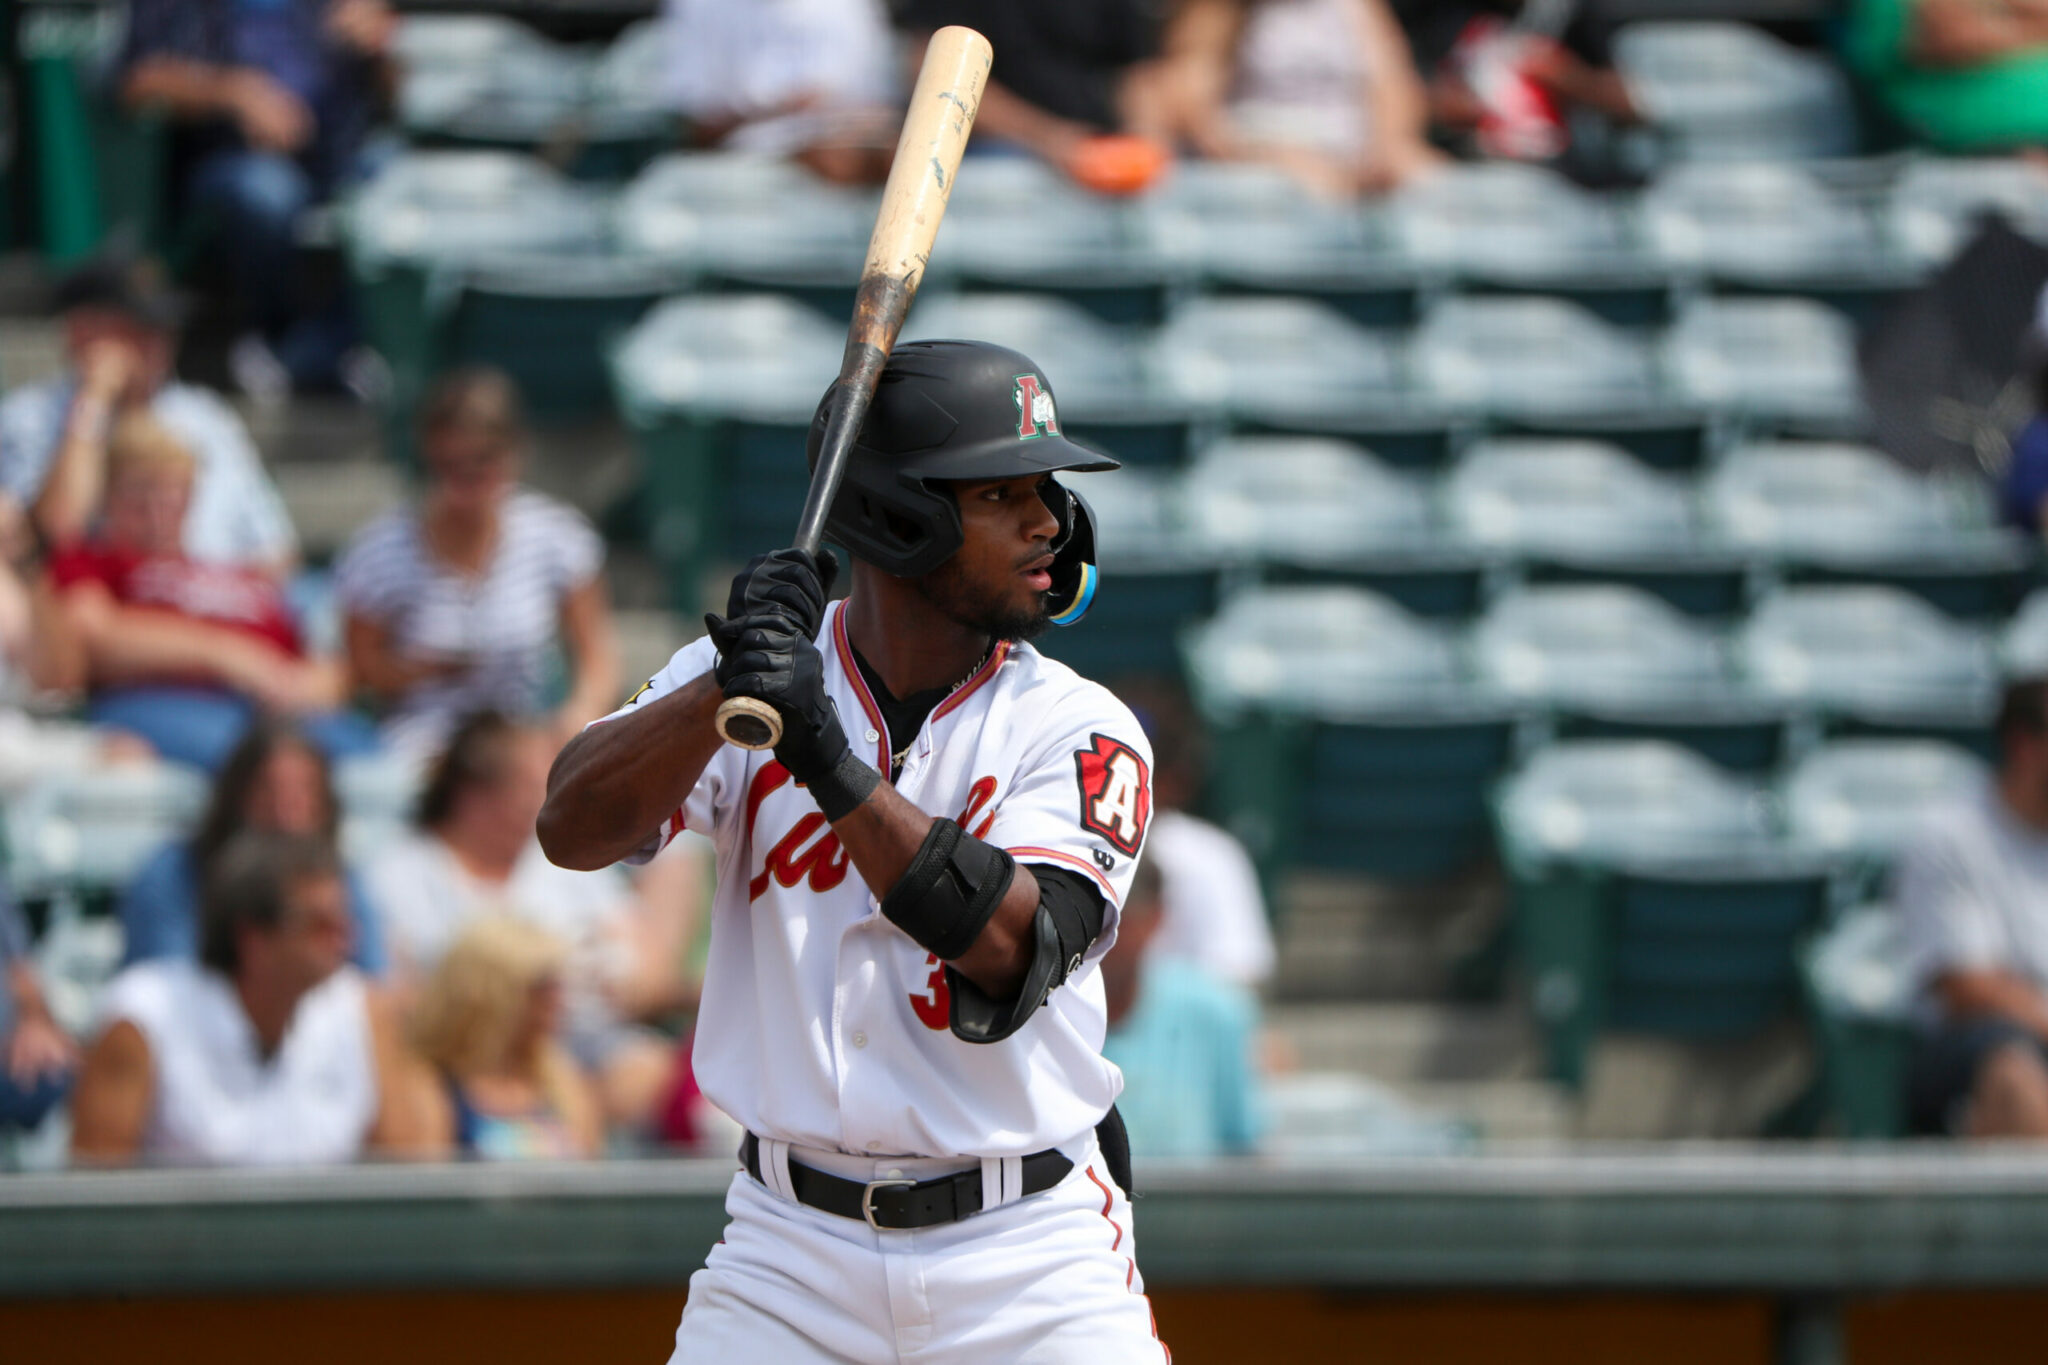 Winter Leagues: Two Hits for Liover Peguero